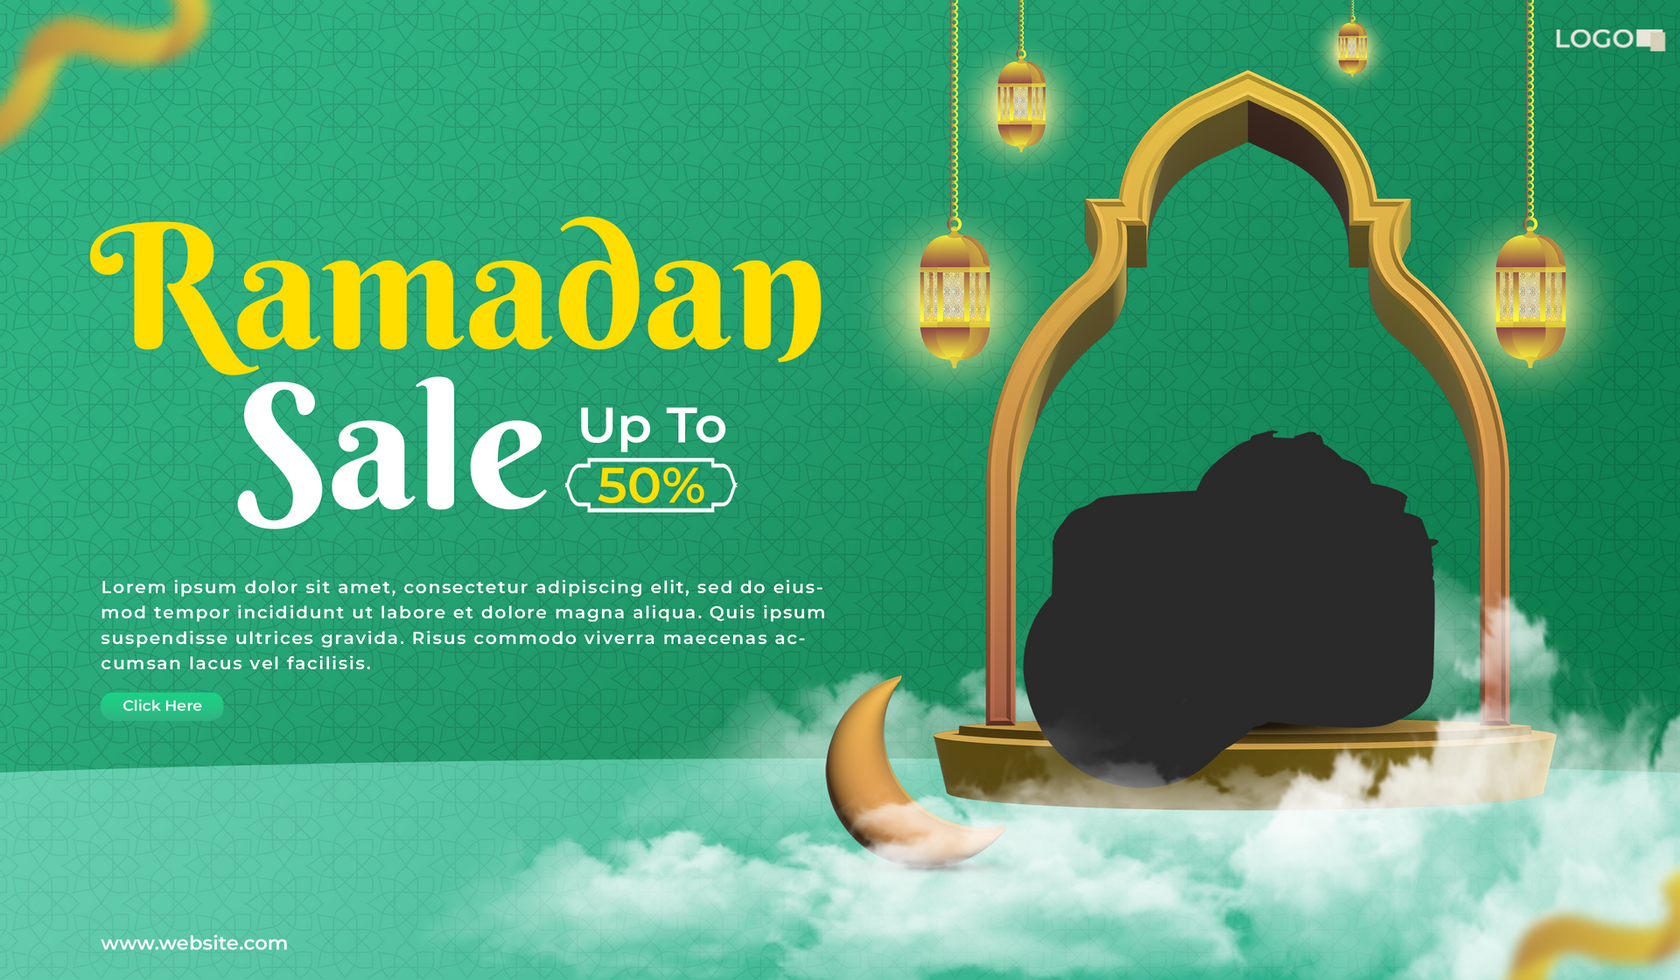 Design promotions and product discounts during Ramadan with 3D frames in green shades suitable for banners or others psd